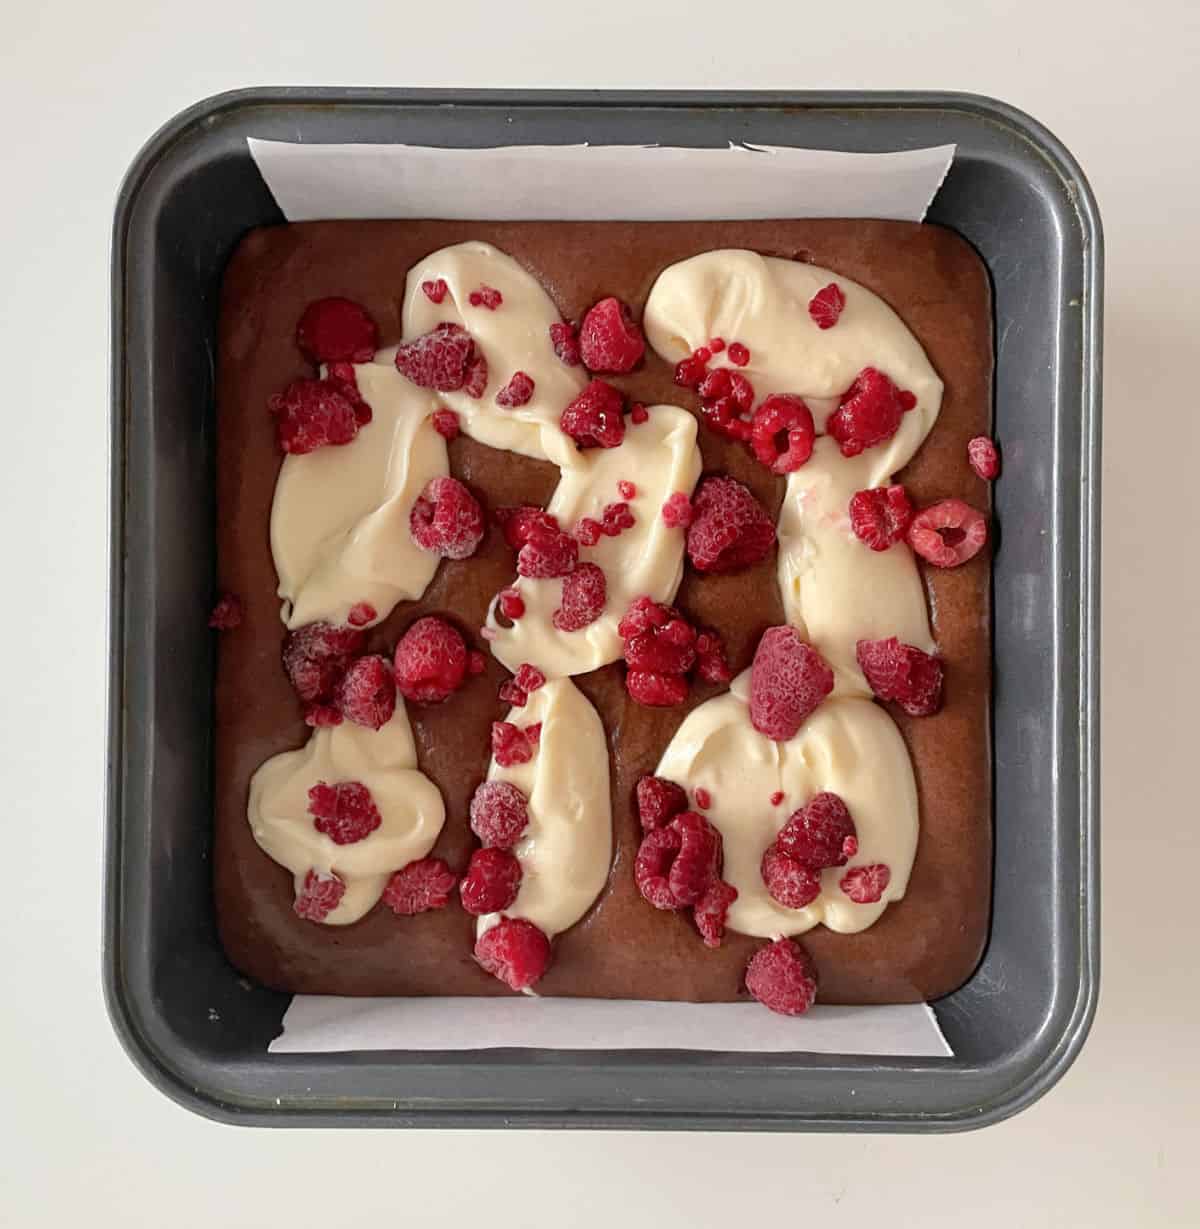 Layered brownie batter, cheesecake mix, and raspberries in a square metal pan on a white surface.